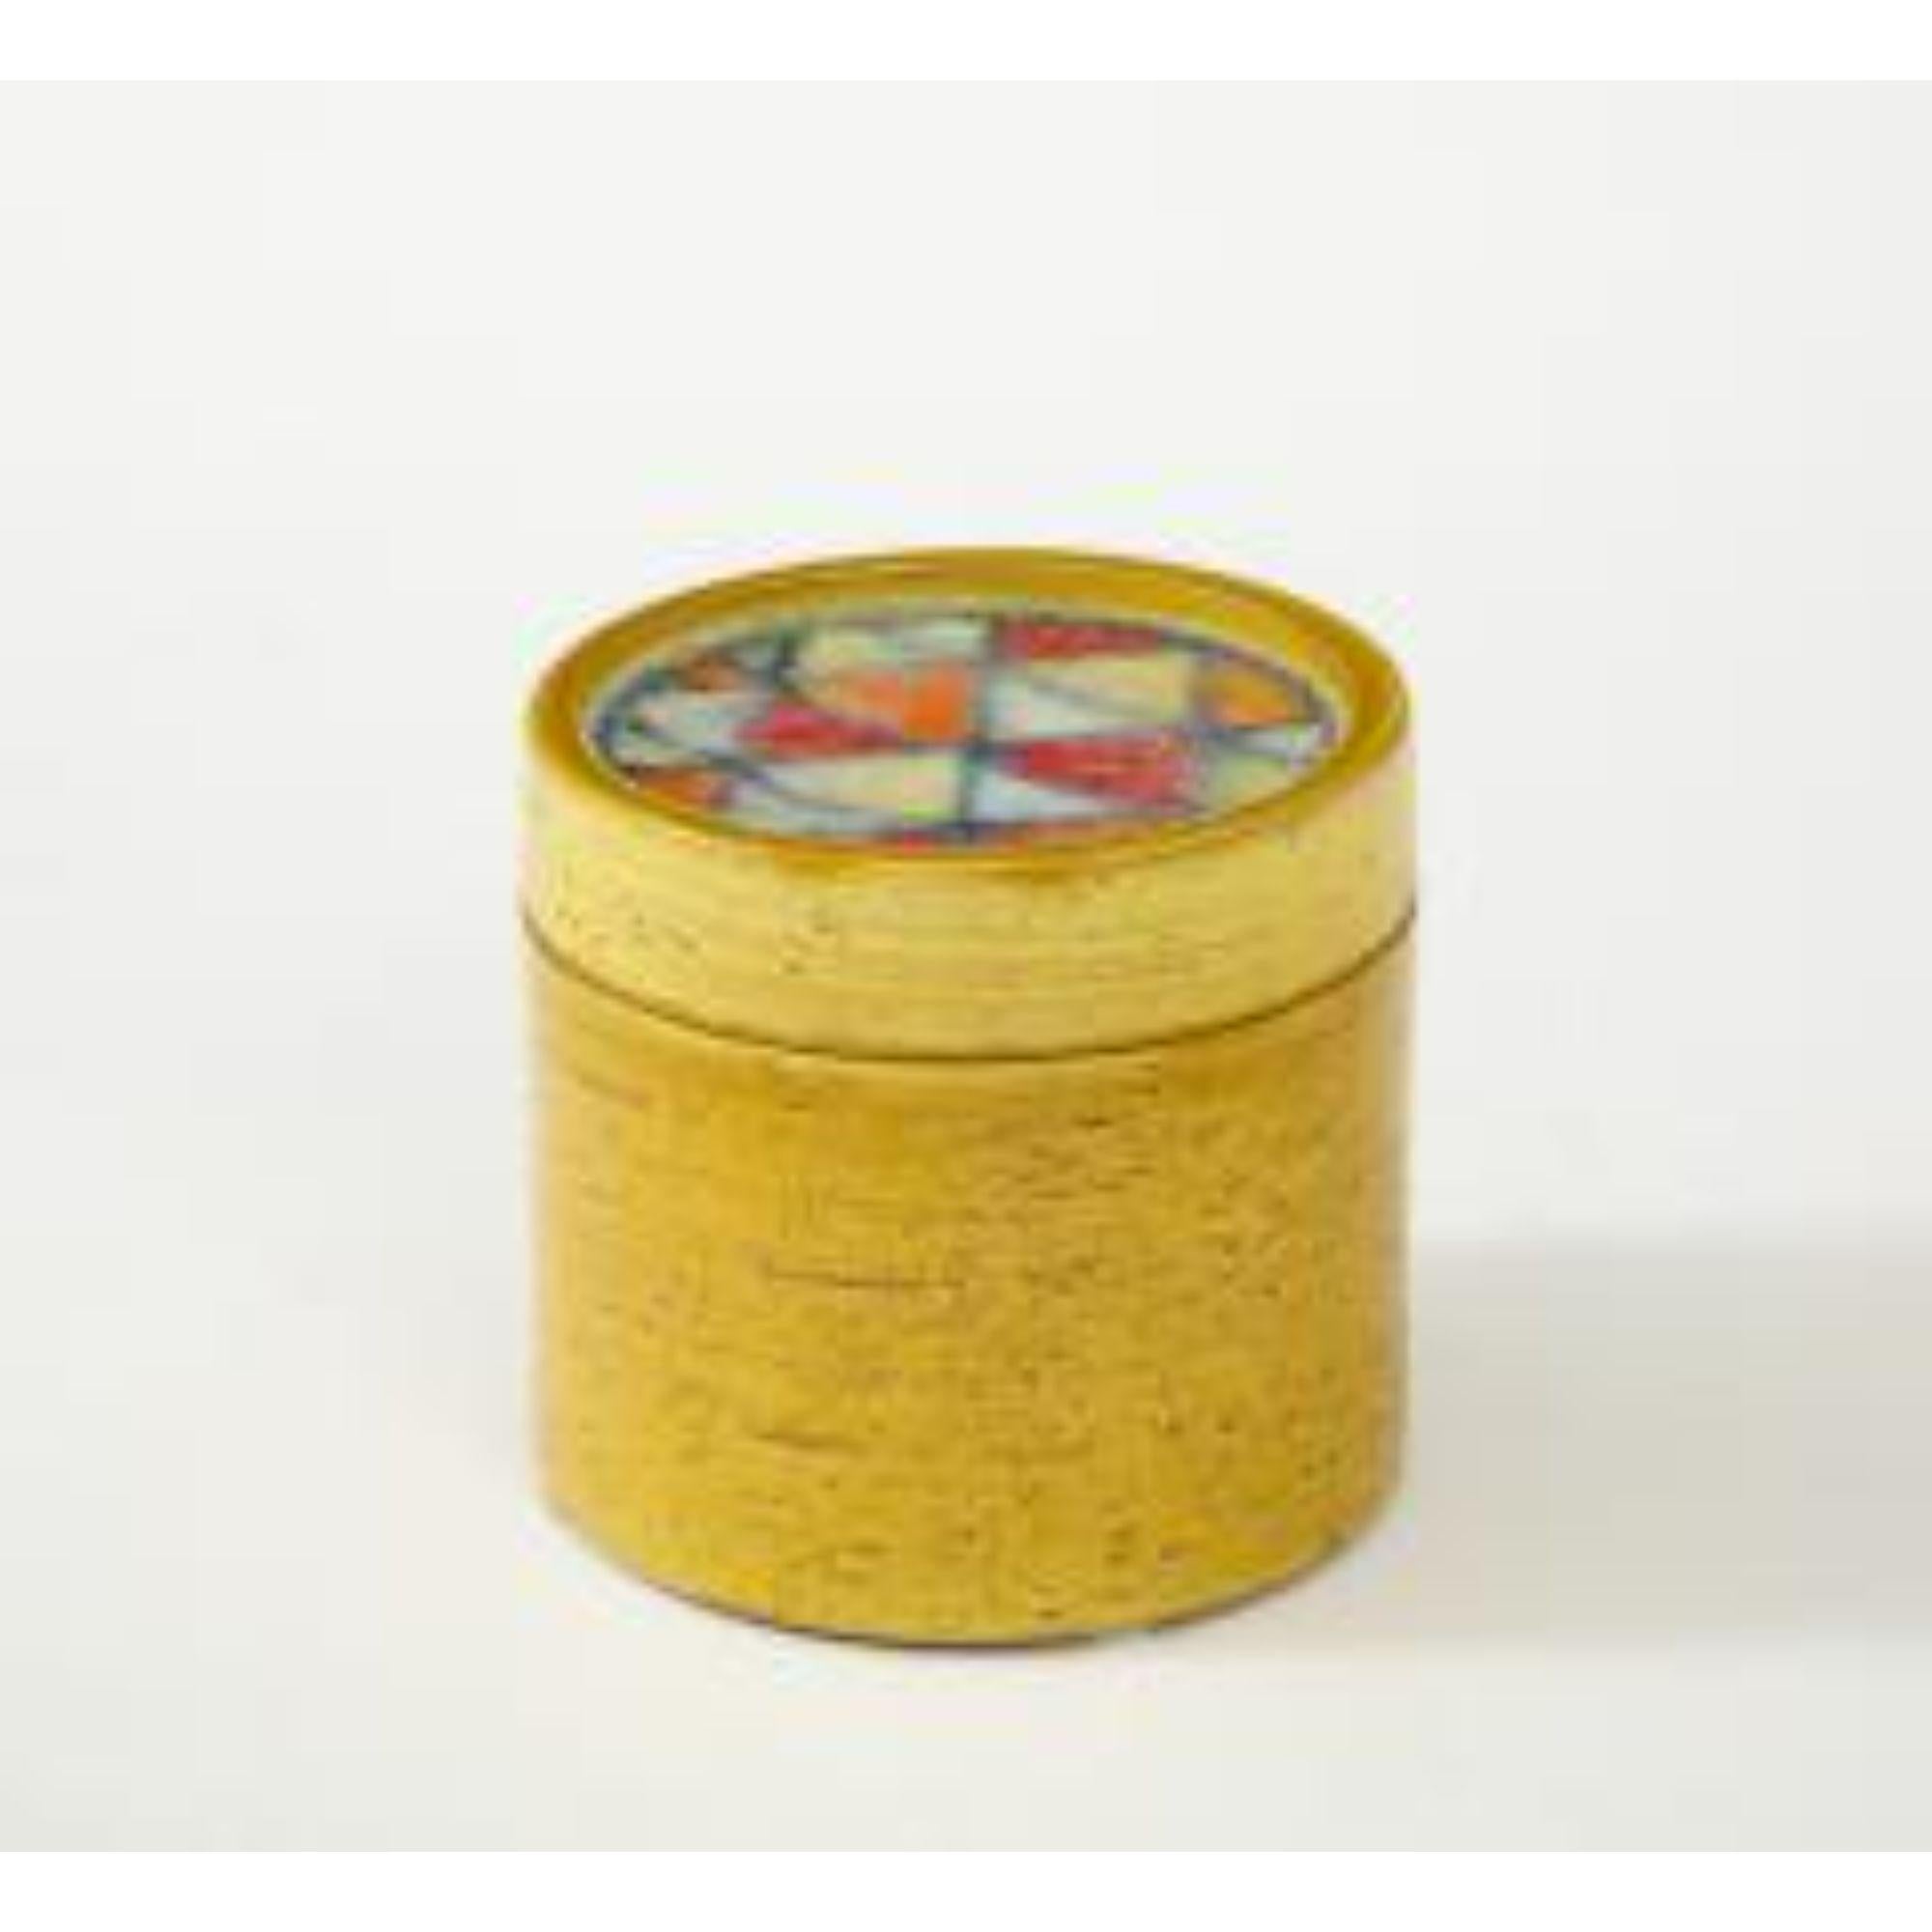 20th Century Bitossi Lidded Box in Glazed Ceramic with Fused Glass Mosaic, circa 1960s For Sale